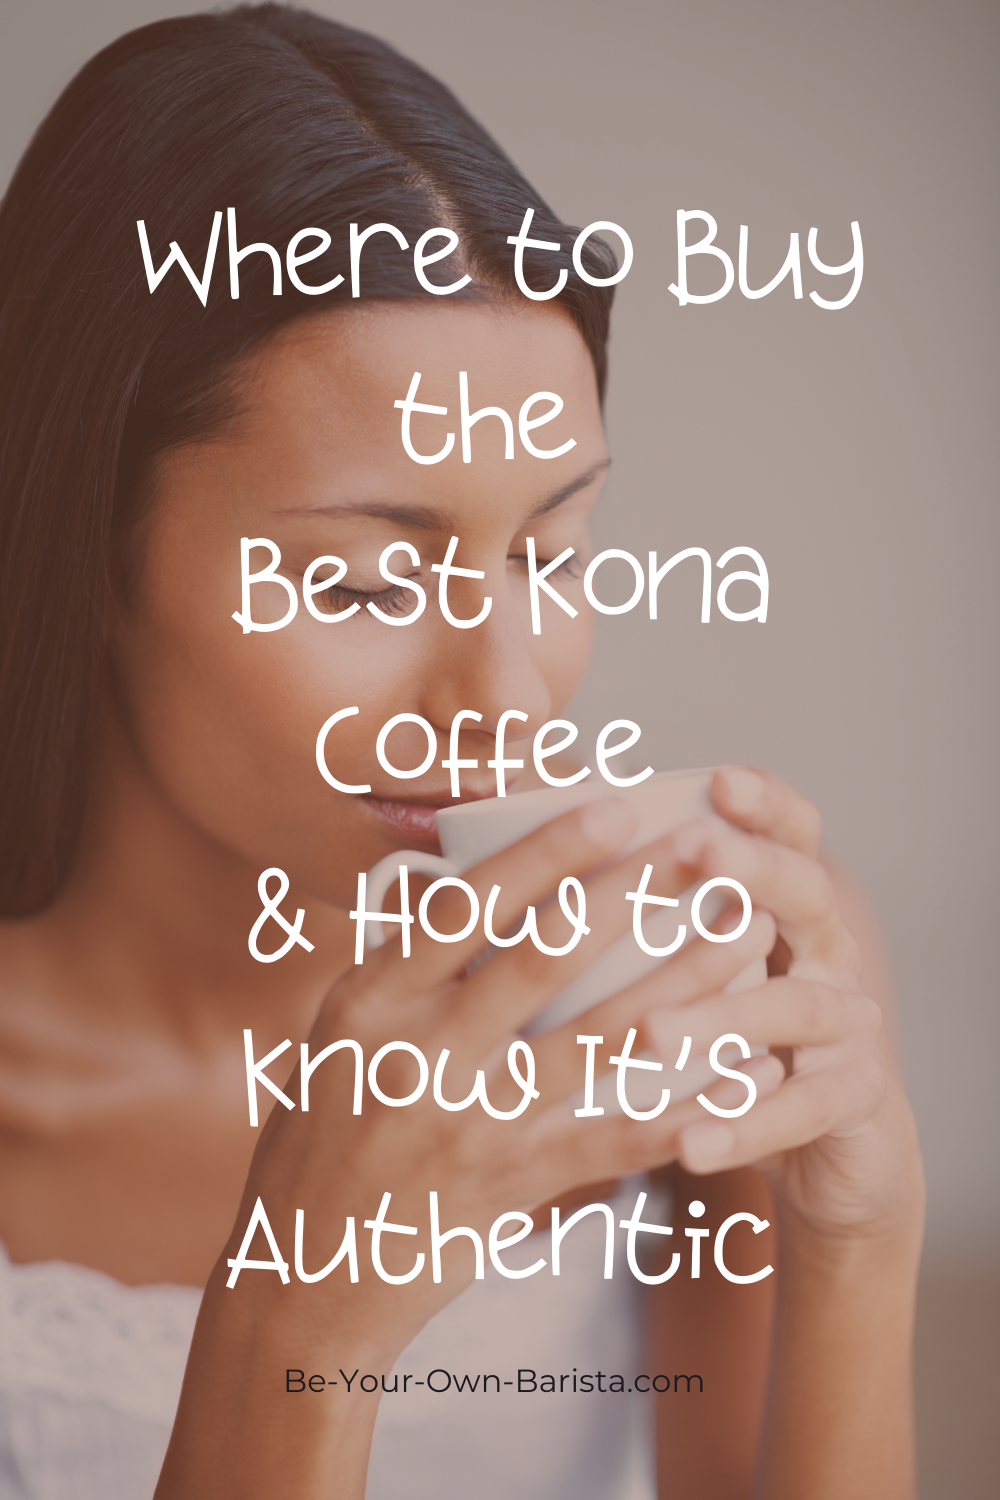 Where to Buy Kona Coffee & How to Know It’s Authentic